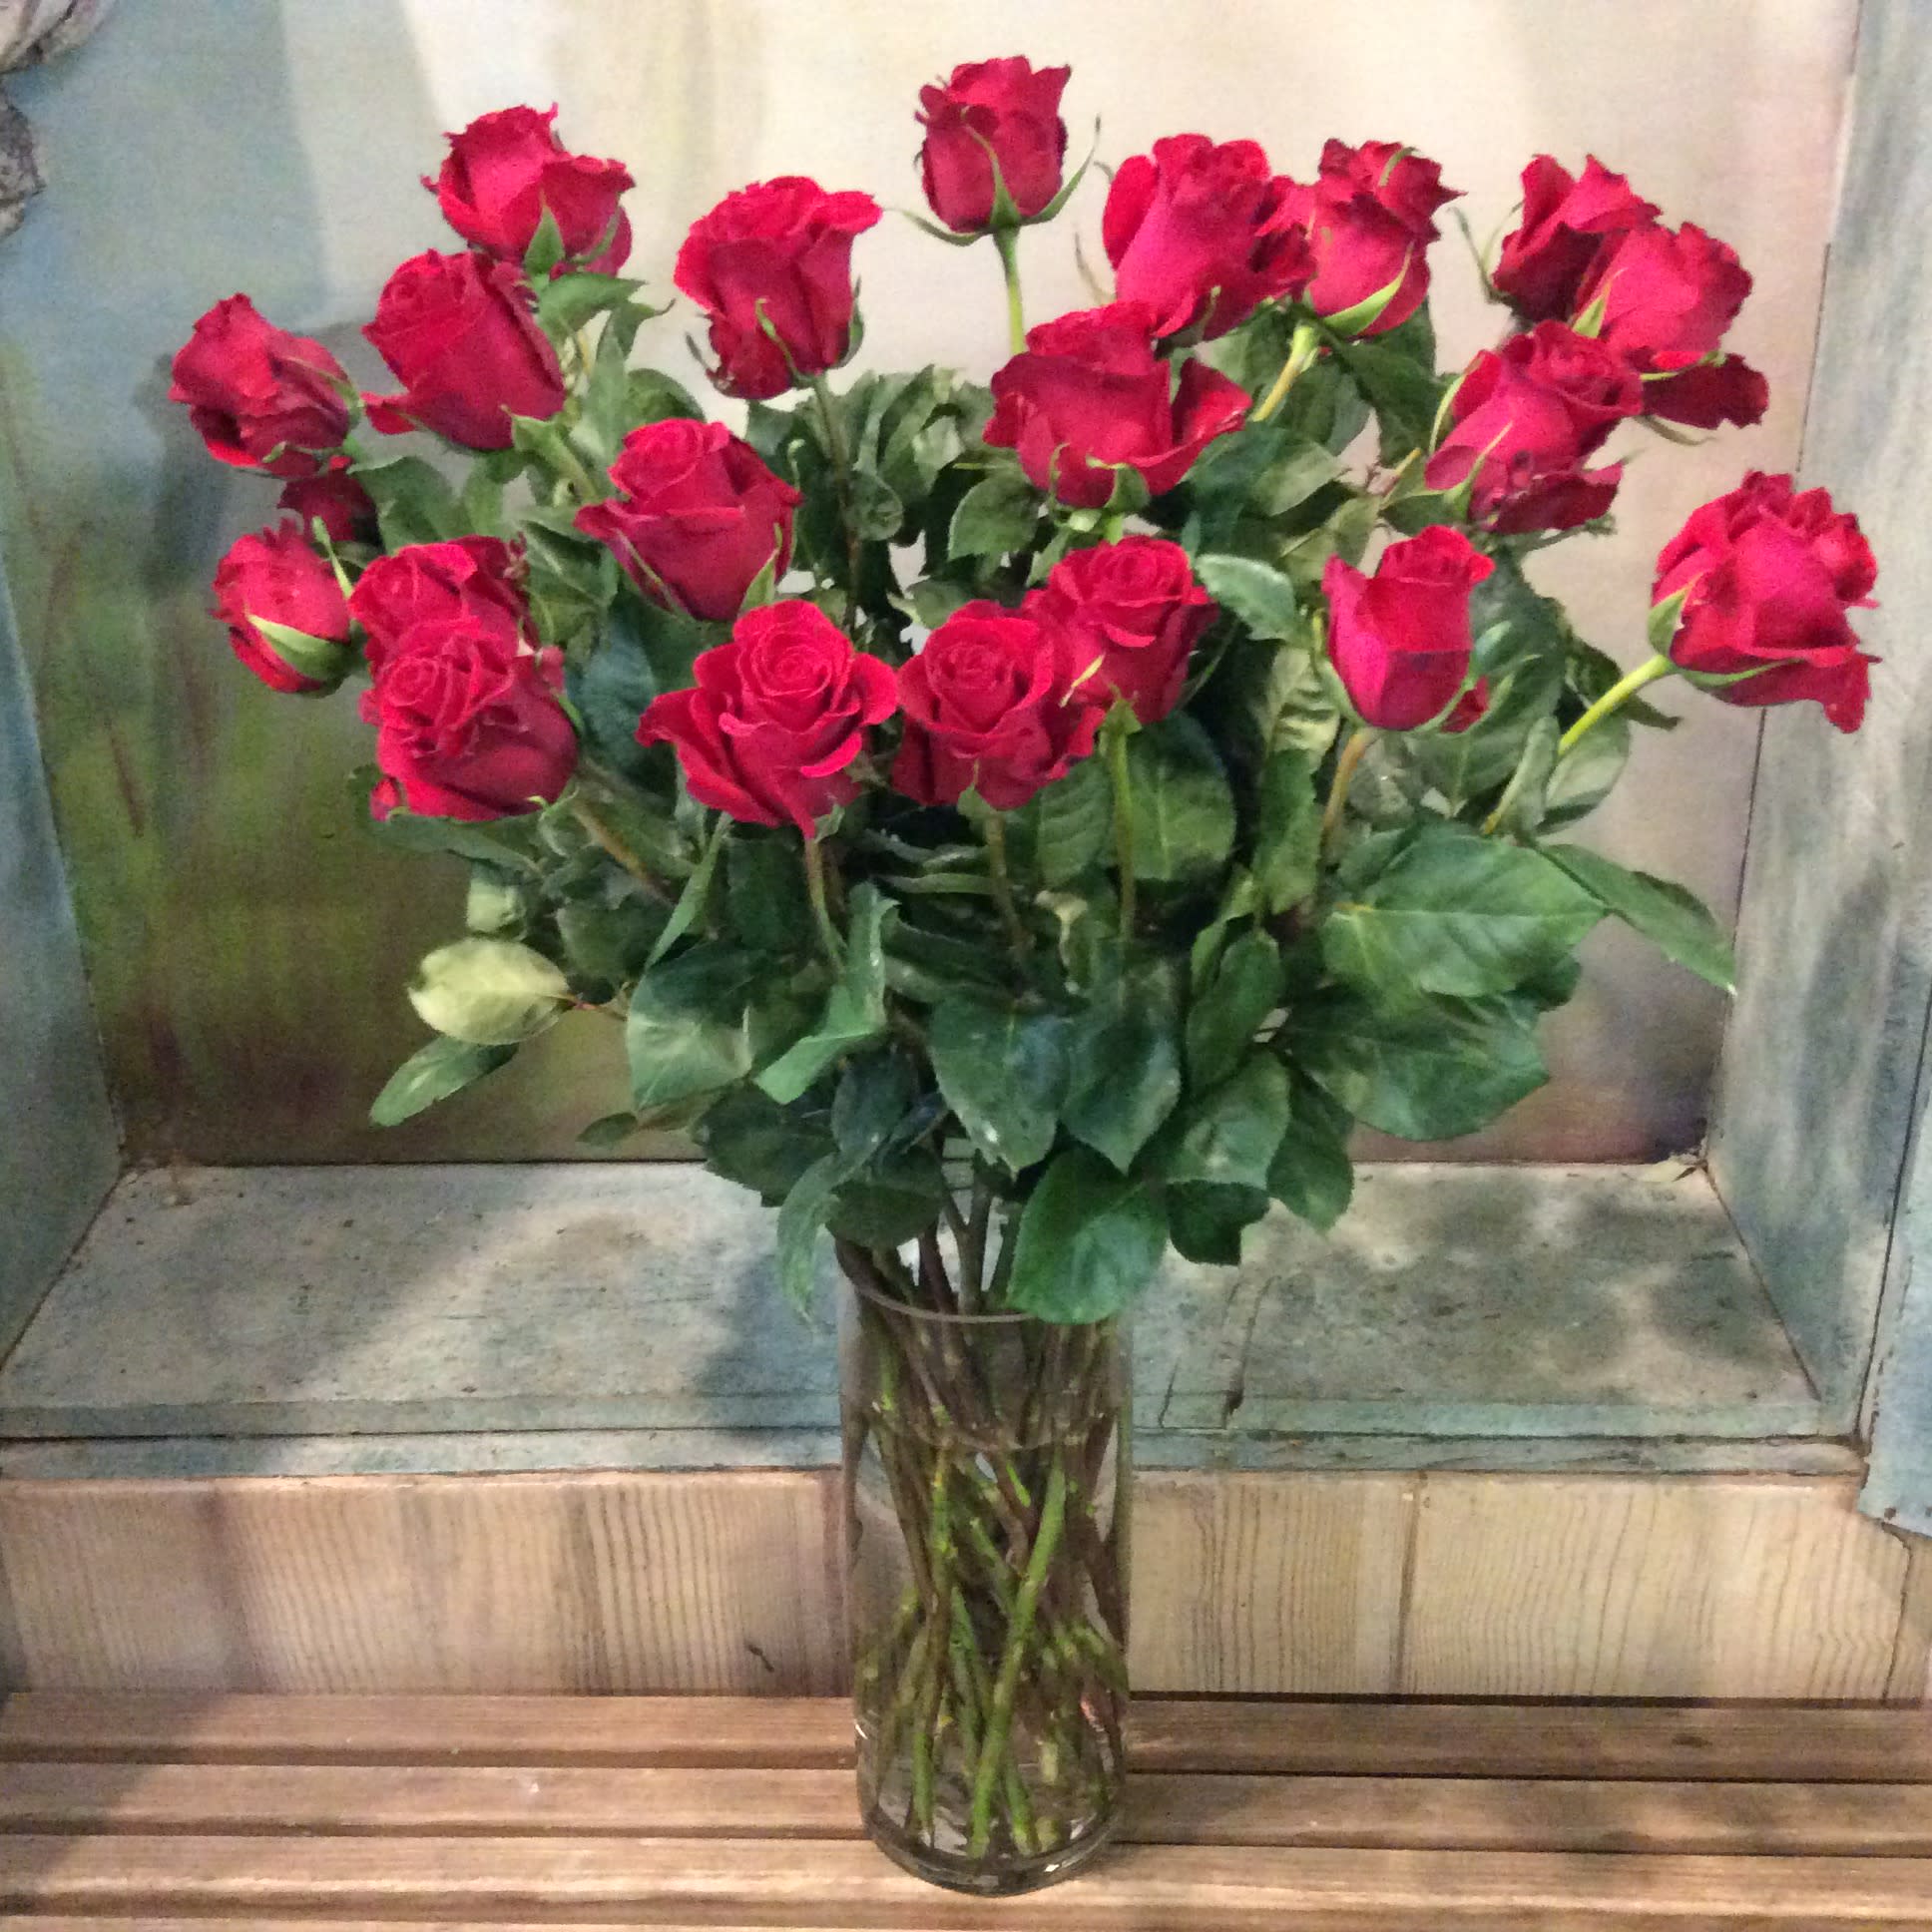 RedRoses - Two dozen red roses in clear glass.